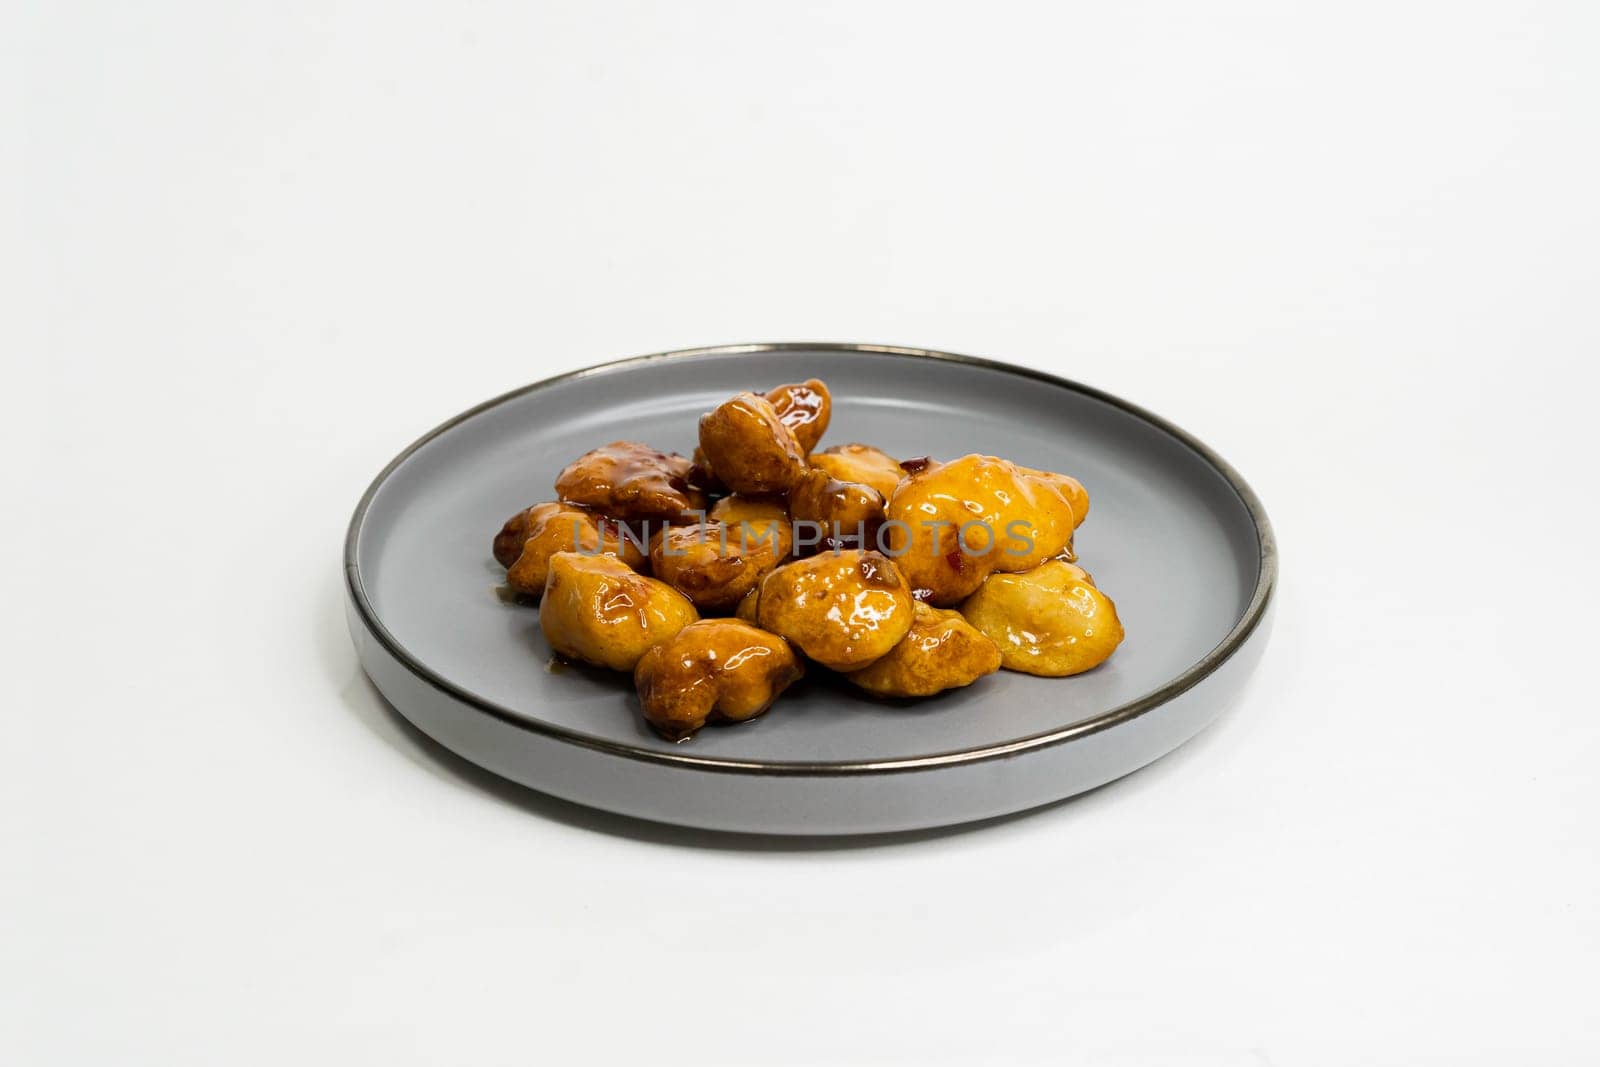 fried chicken nuggets in sauce in a flat plate on a white background